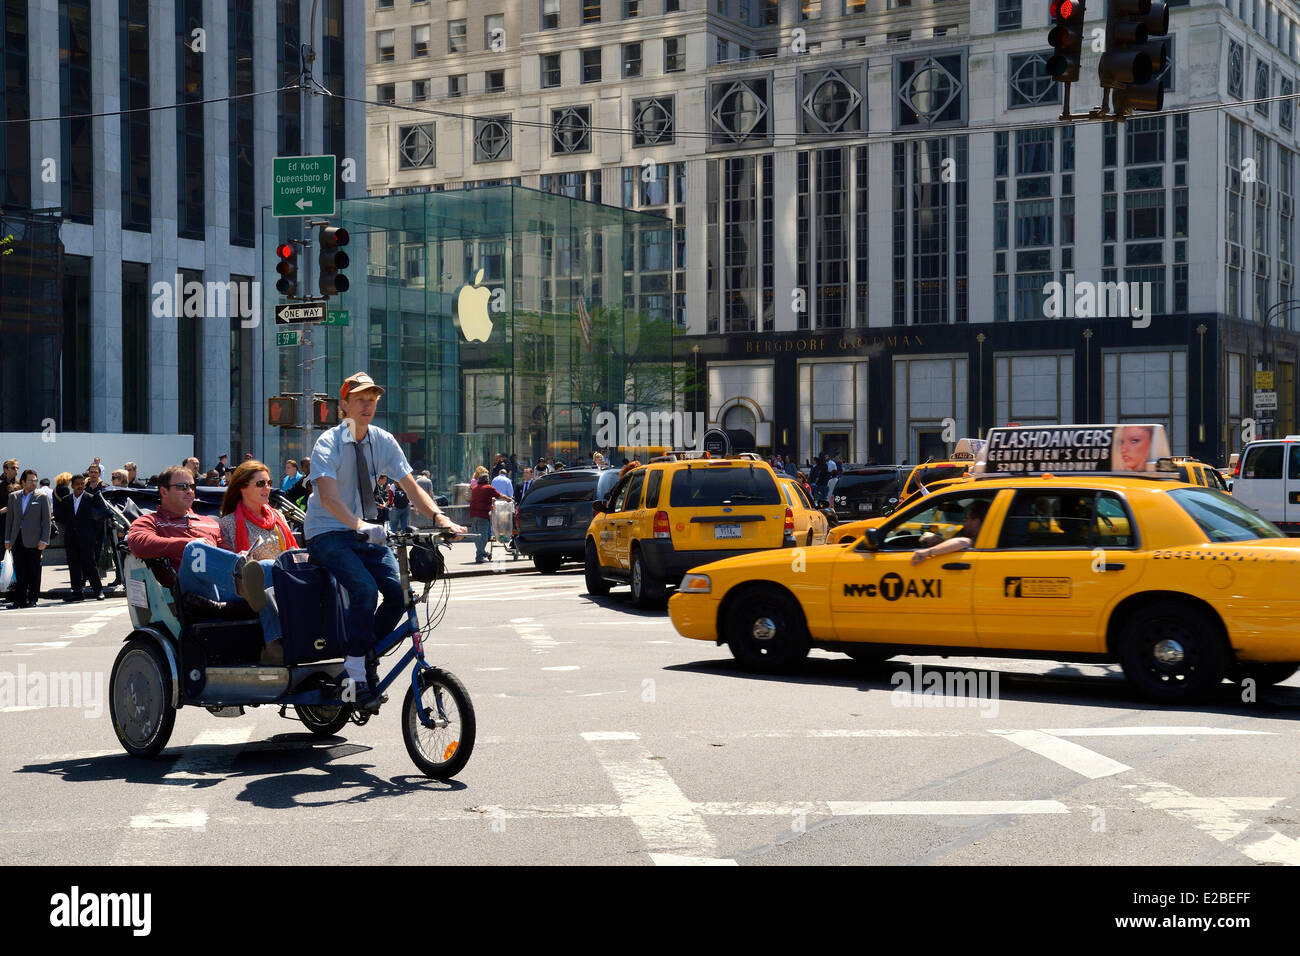 United States, New York City, Manhattan, Midtown, 5th Avenue at Grand Army Plaza, taxis and bicycle taxi in front of Apple store Stock Photo